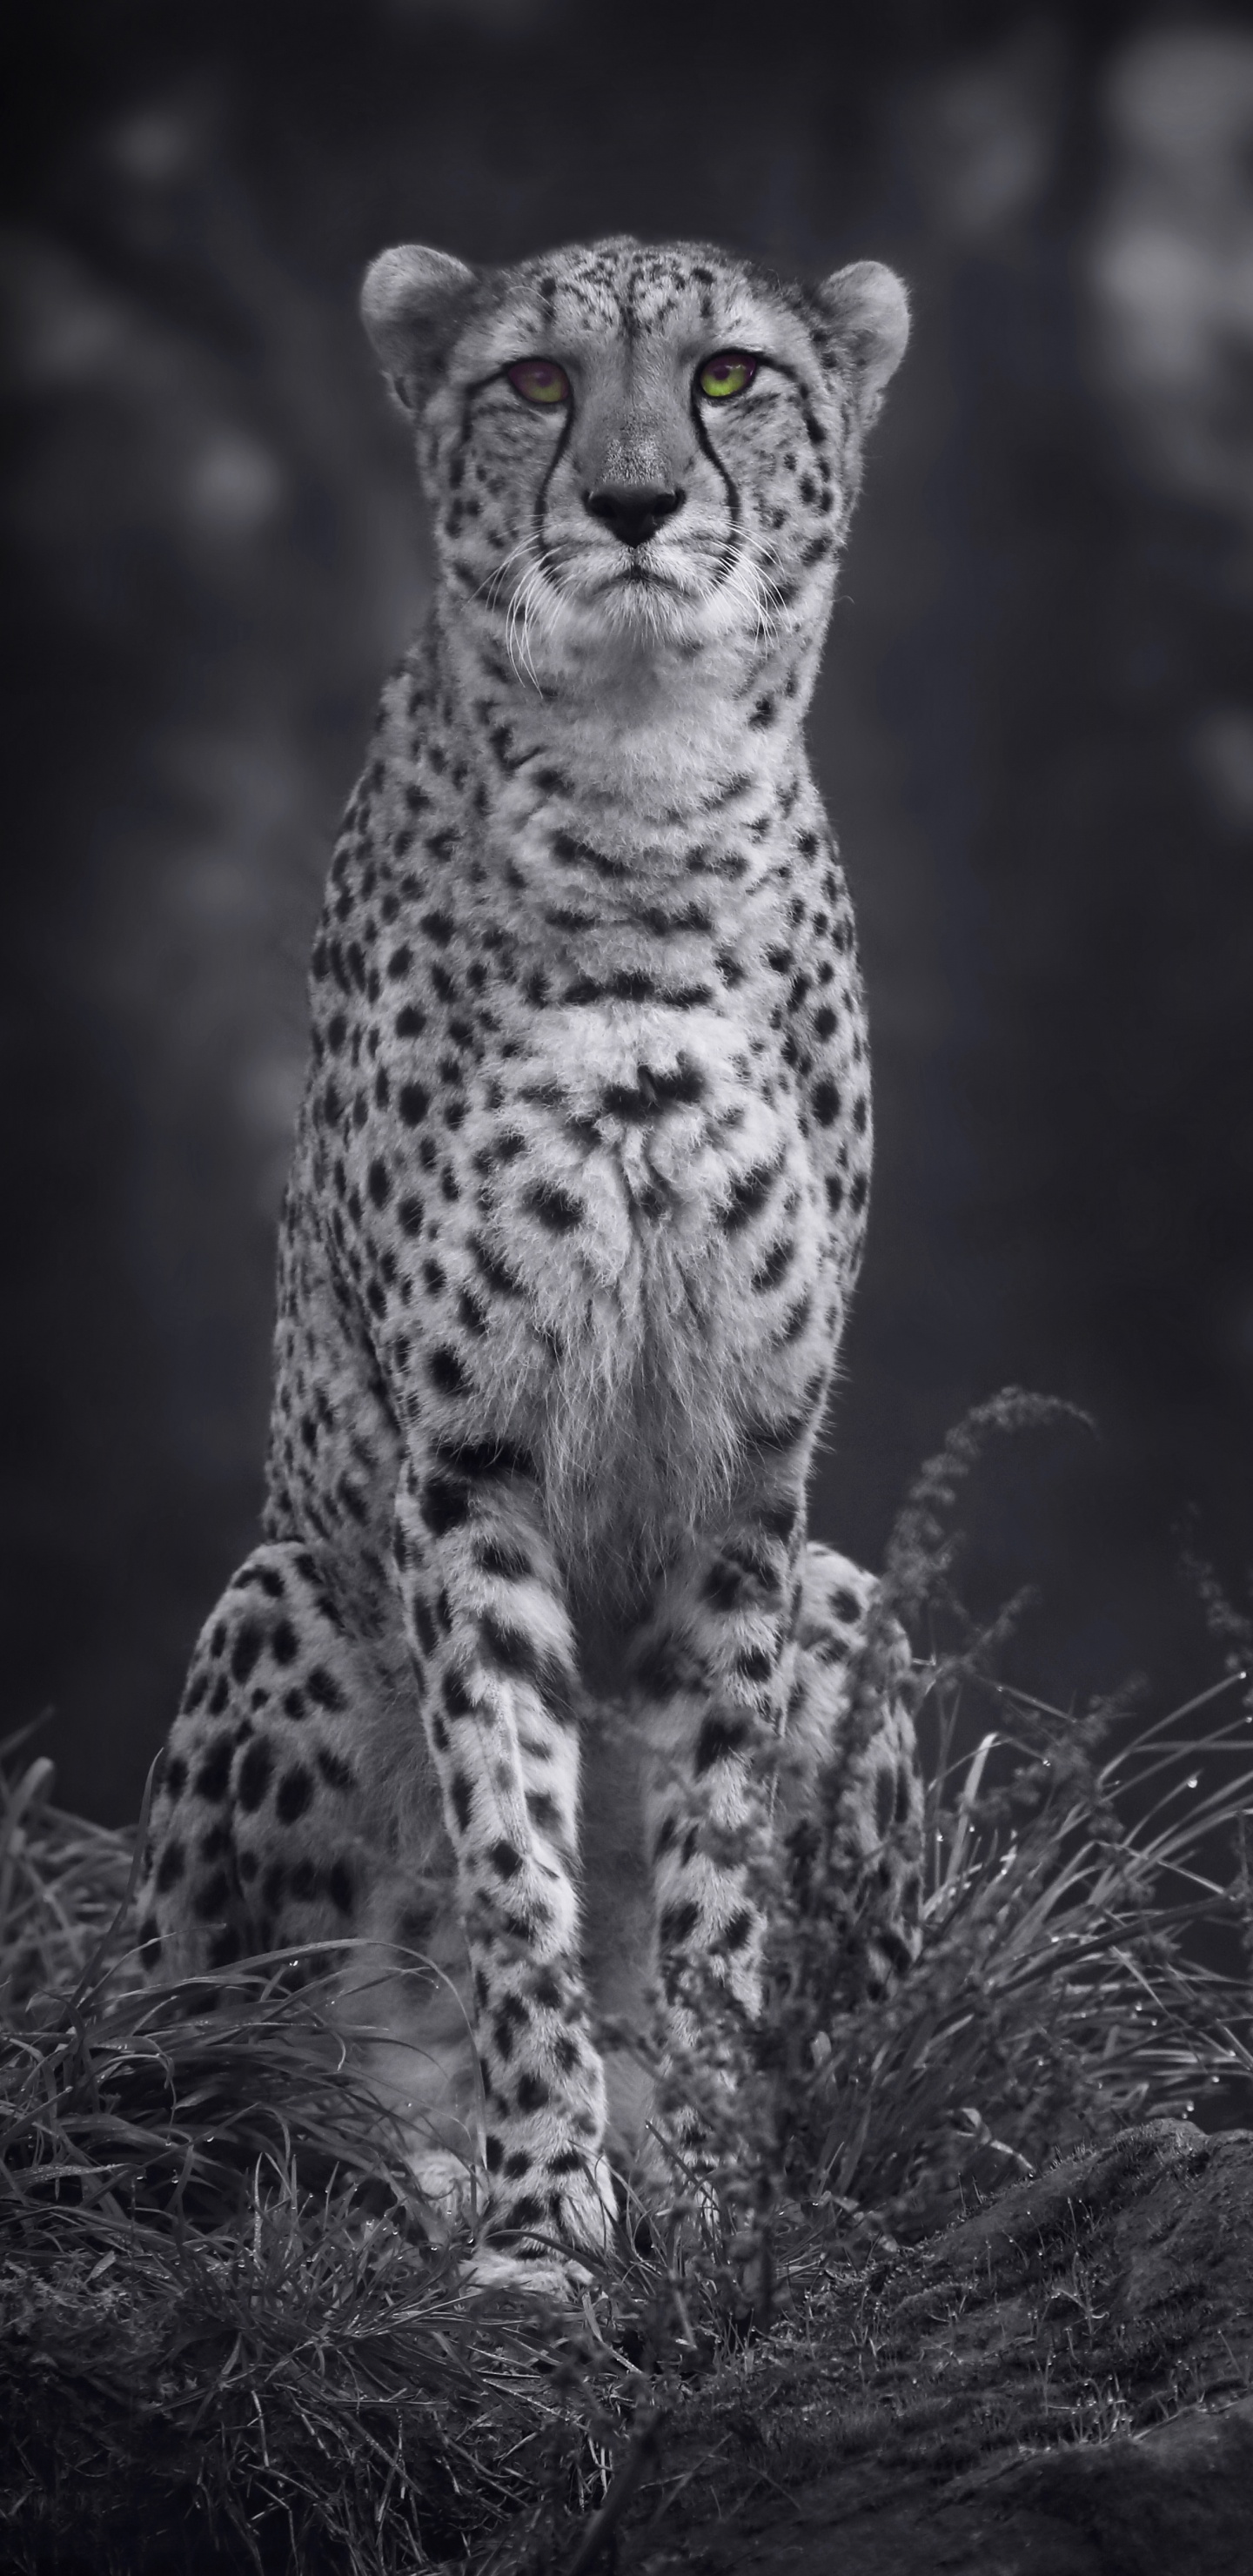 Grayscale Photo of Cheetah on Grass. Wallpaper in 1440x2960 Resolution